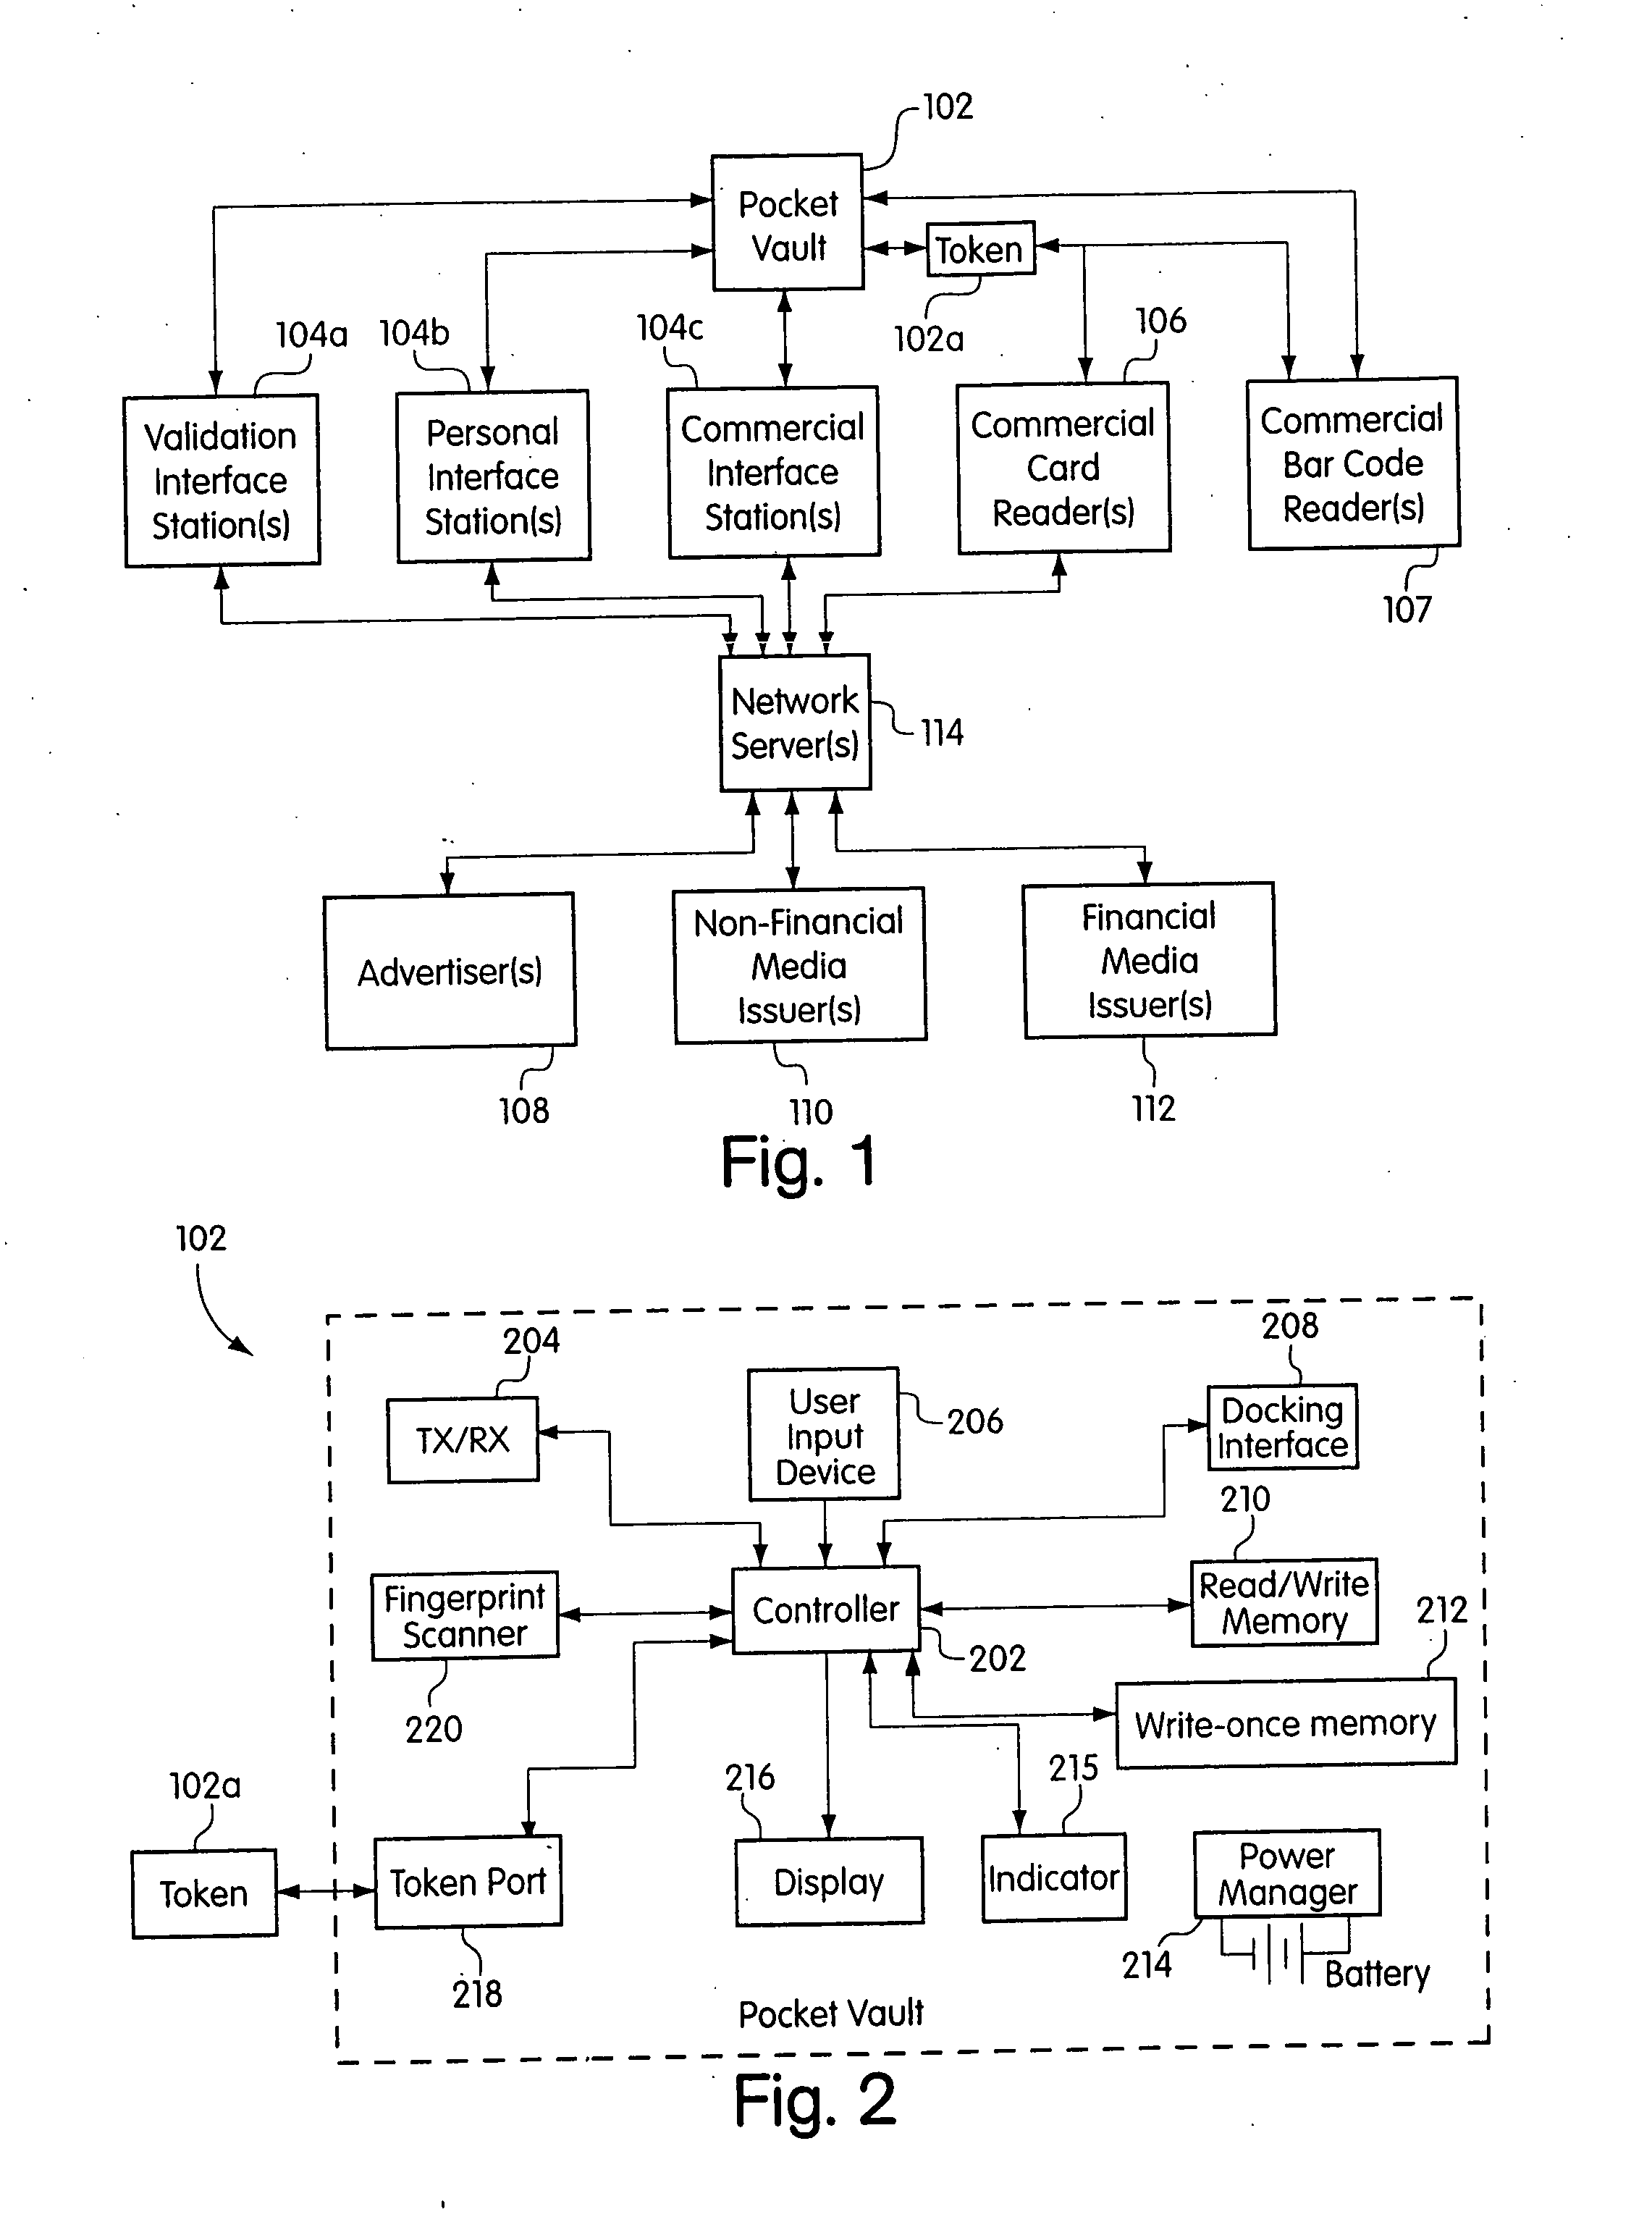 Portable electronic authorization system and method